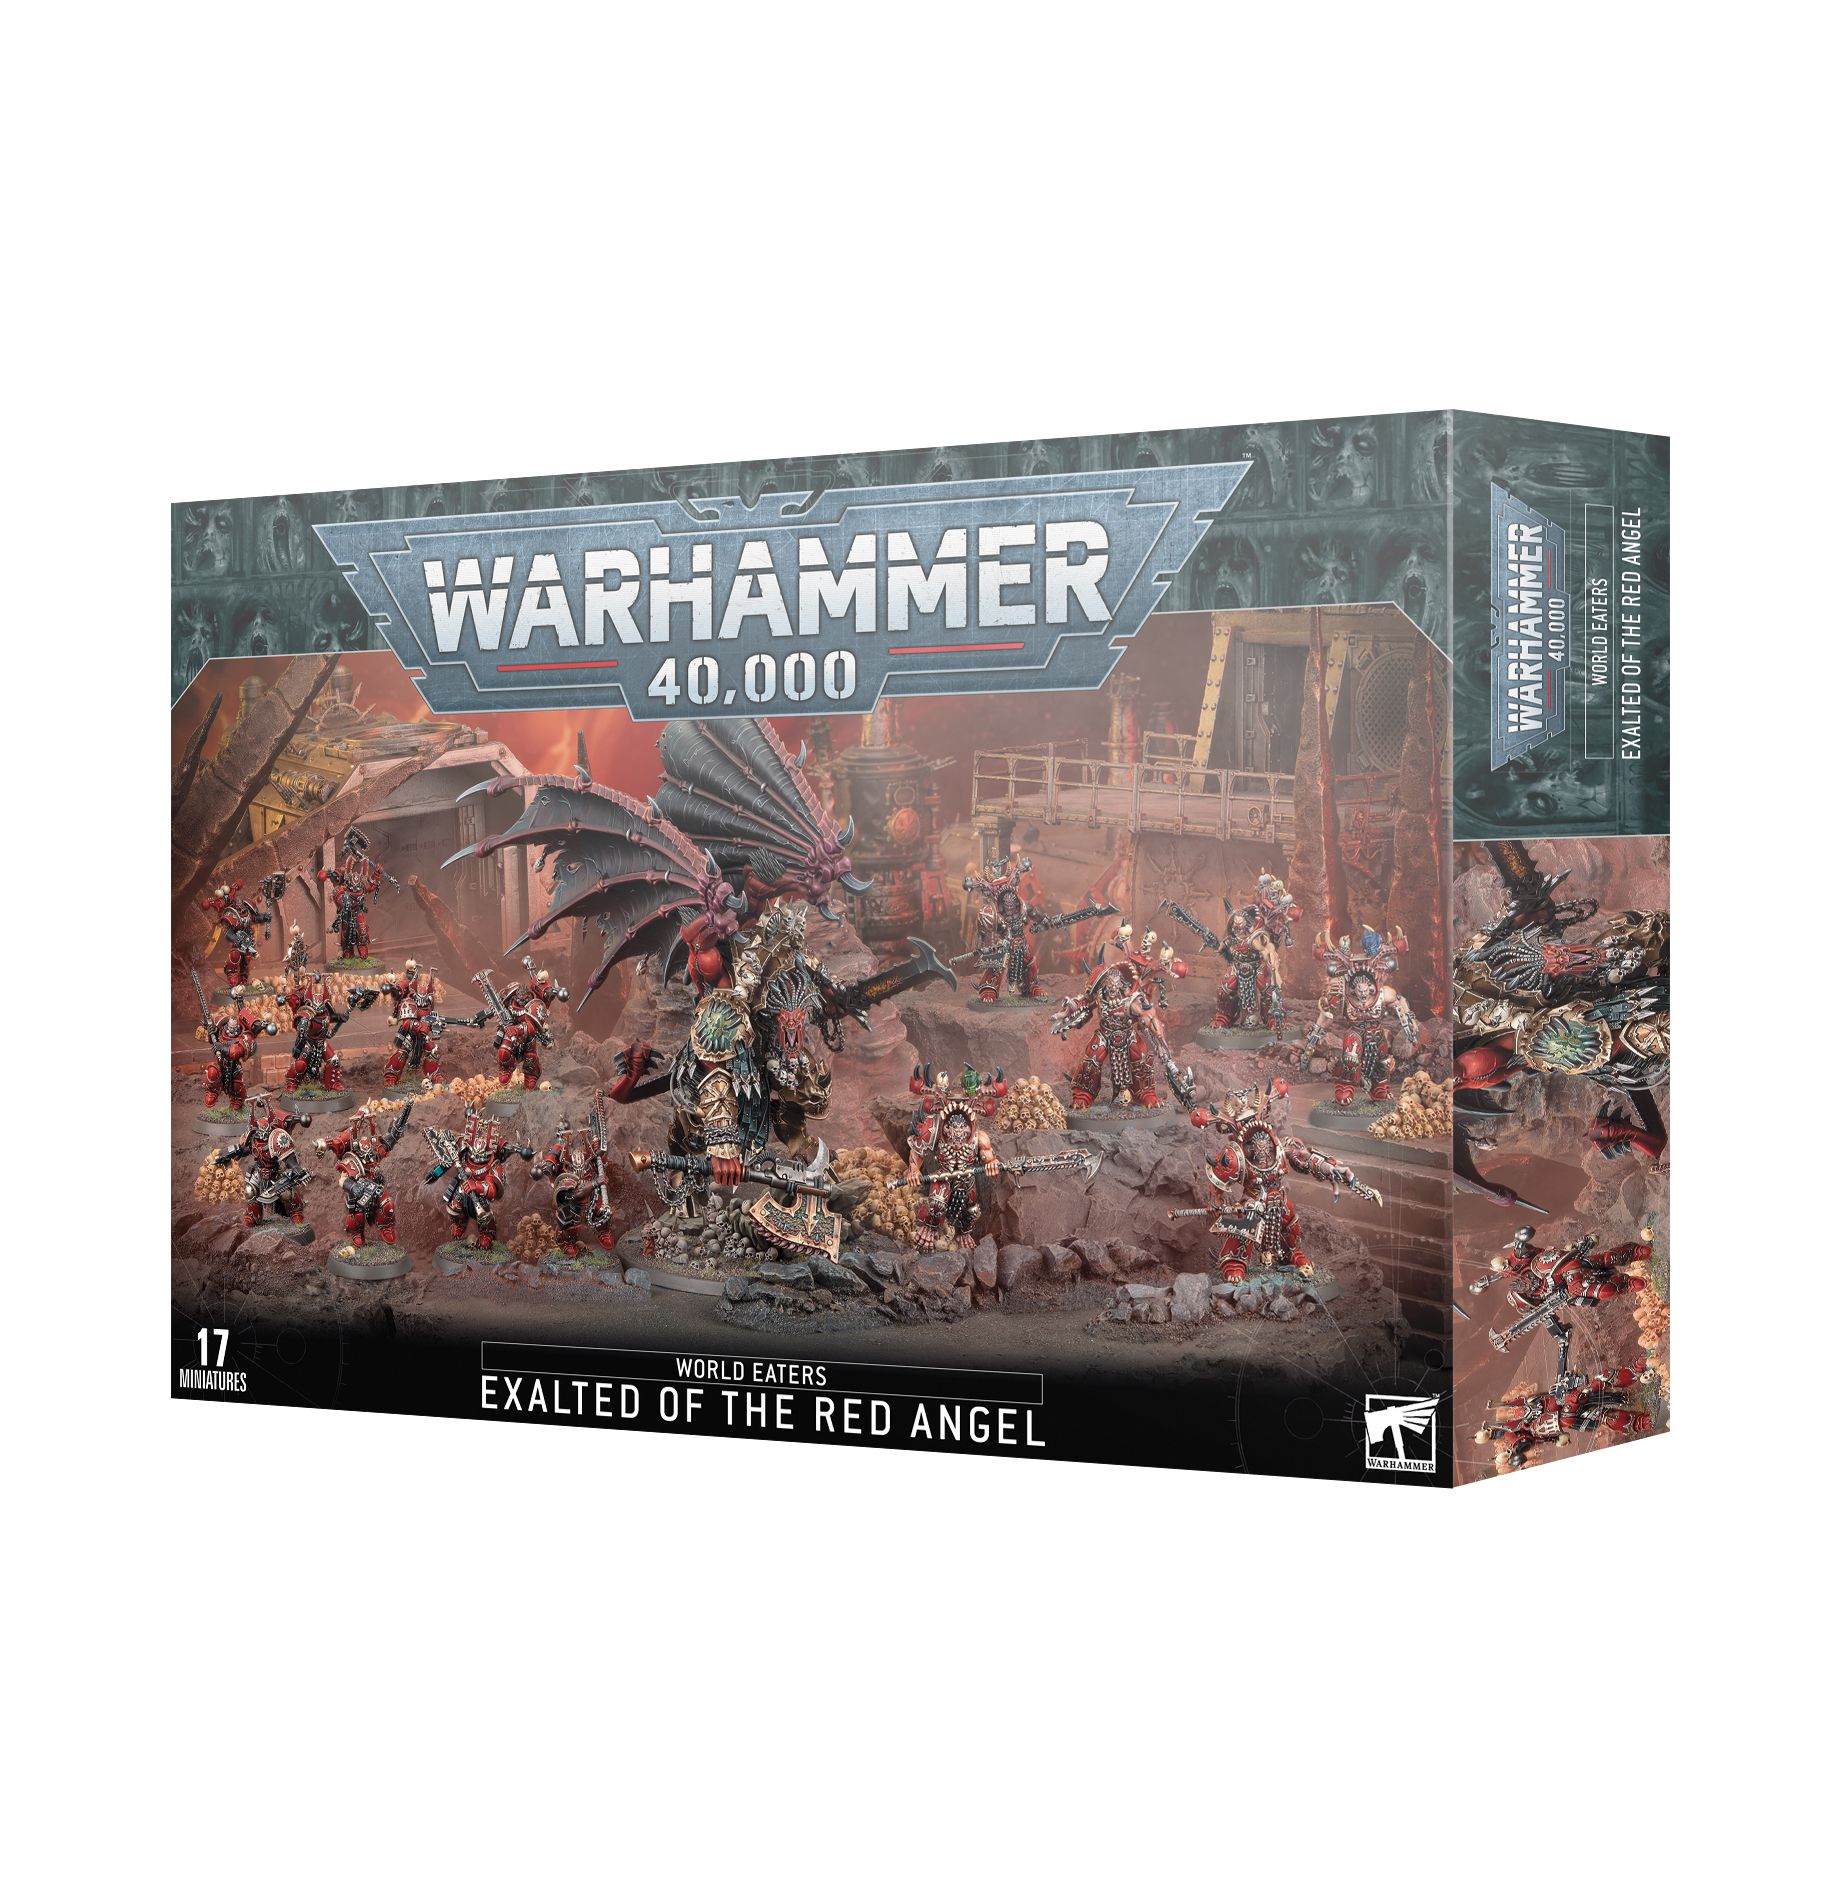 Warhammer 40,000: World Eaters Exhalted of the Red Angel 